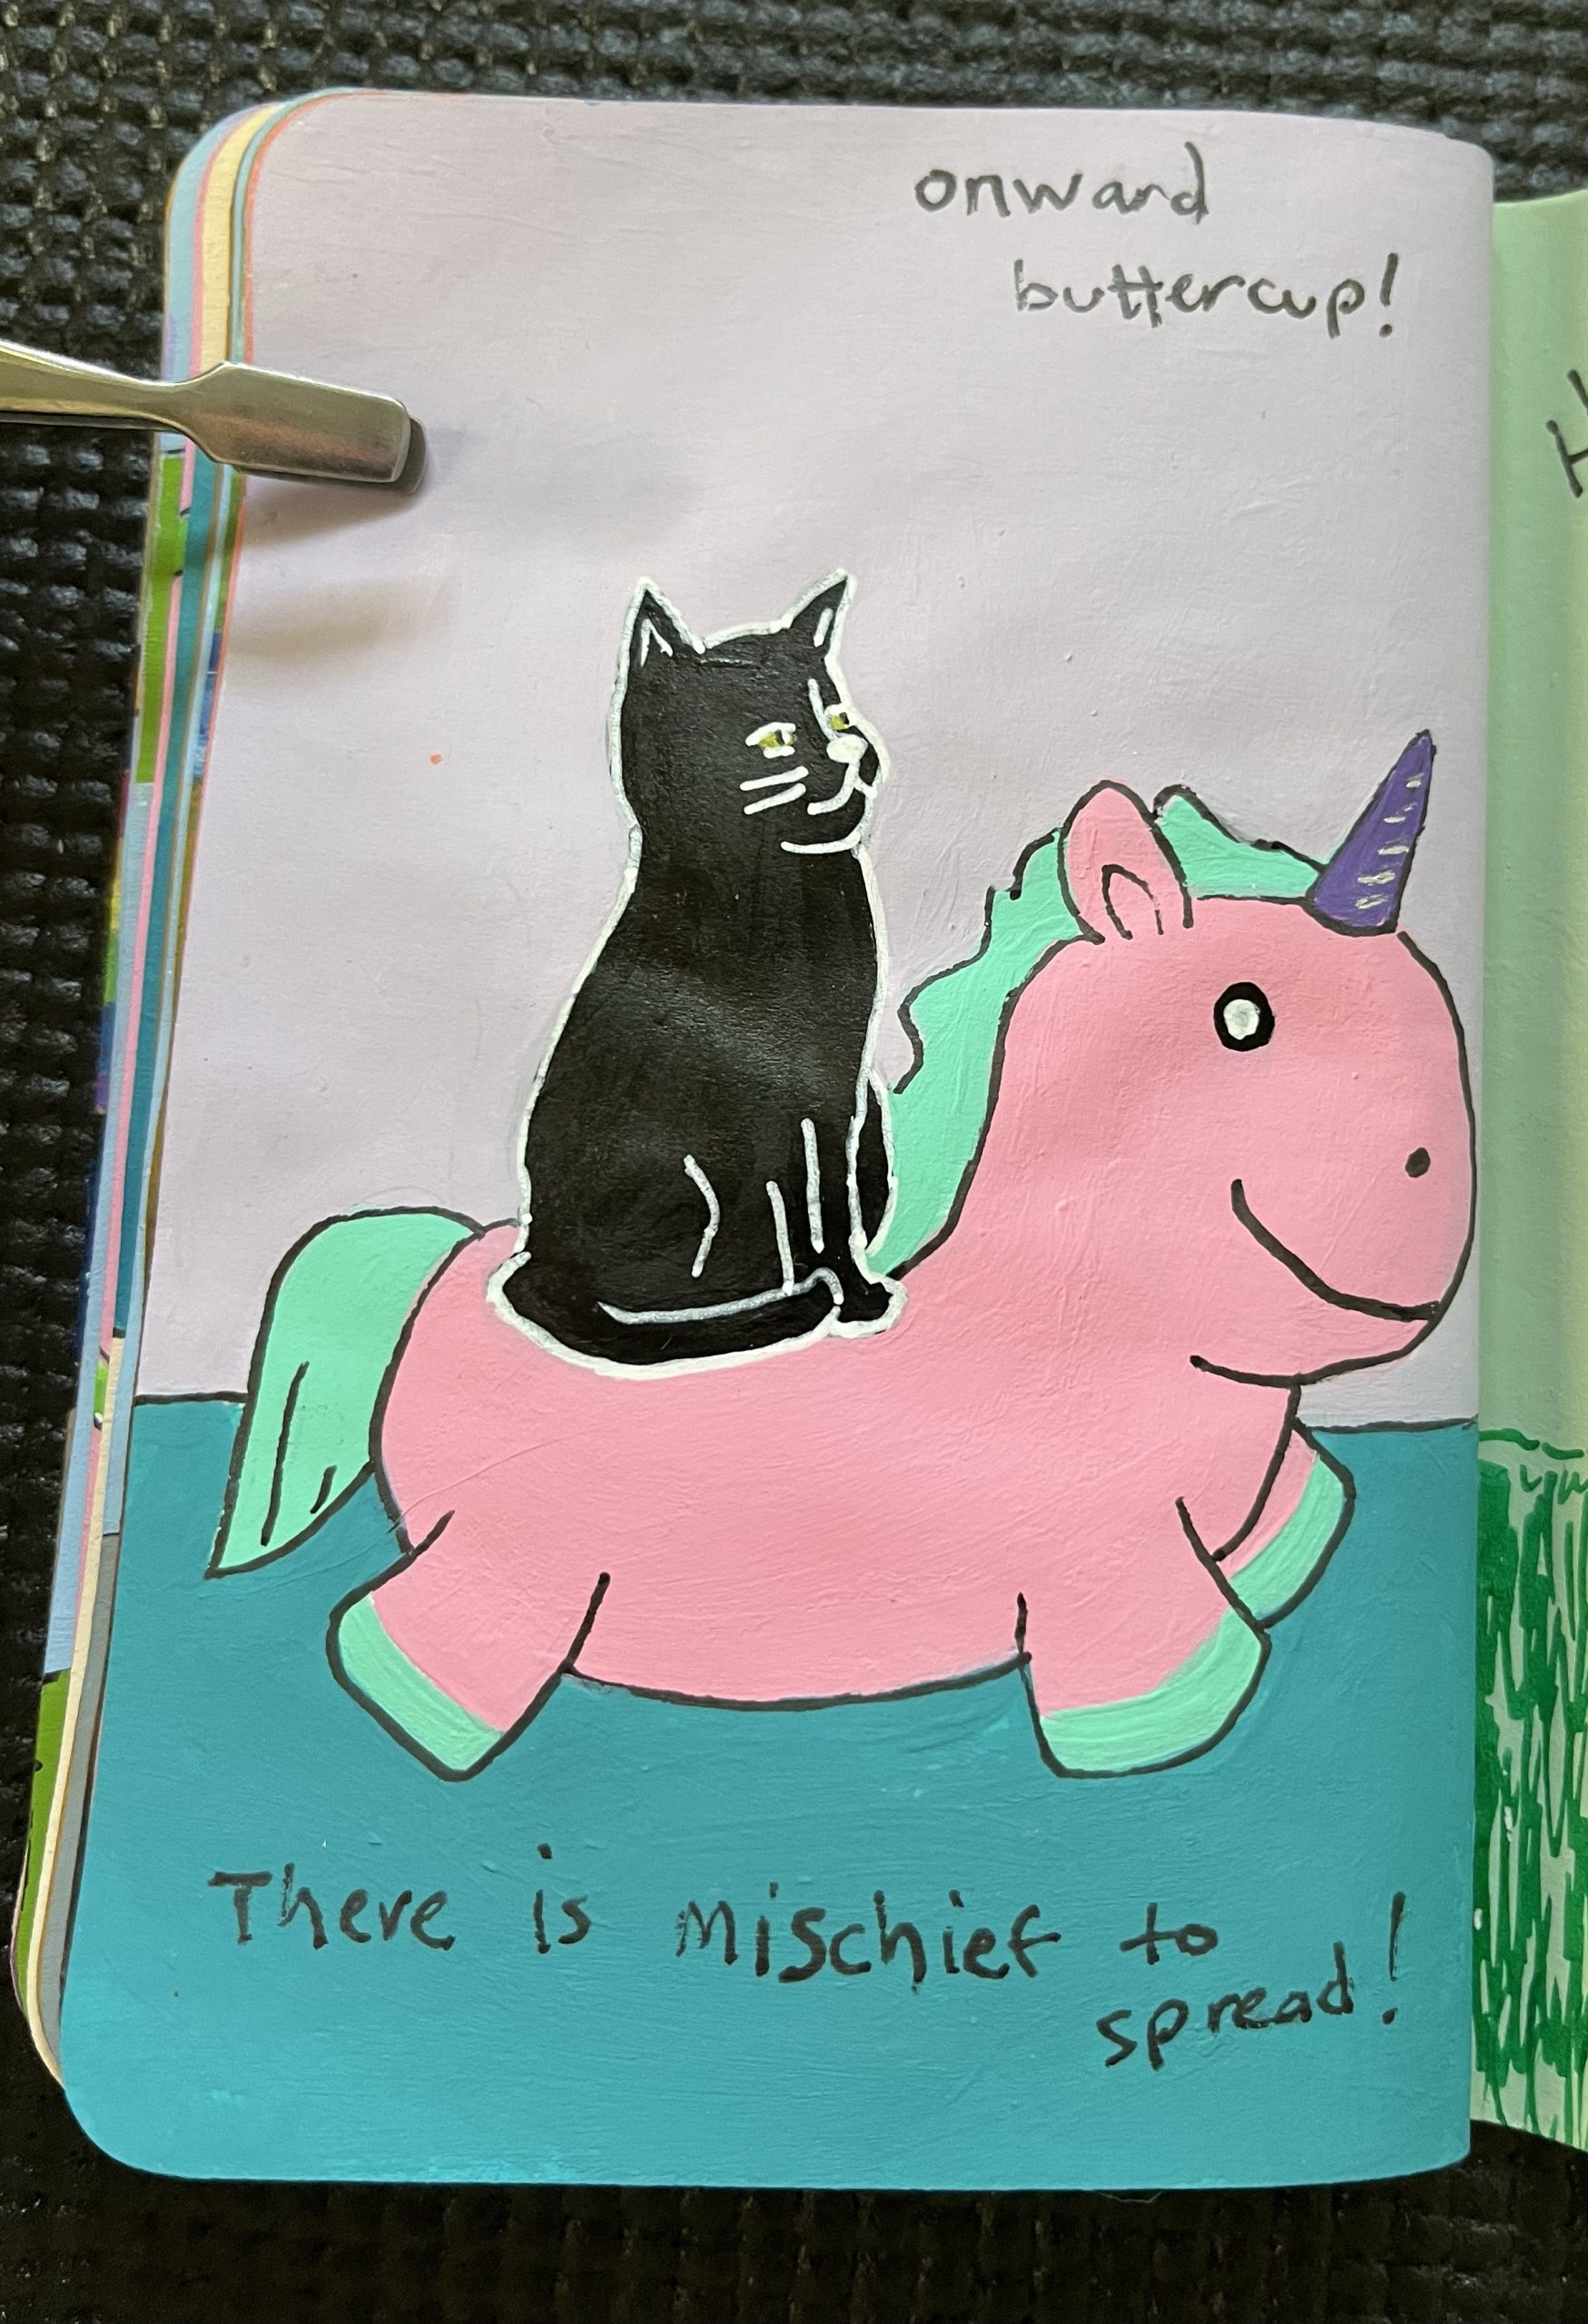 A painted page showing a mischievous kitten on a unicorn stuffed animal.